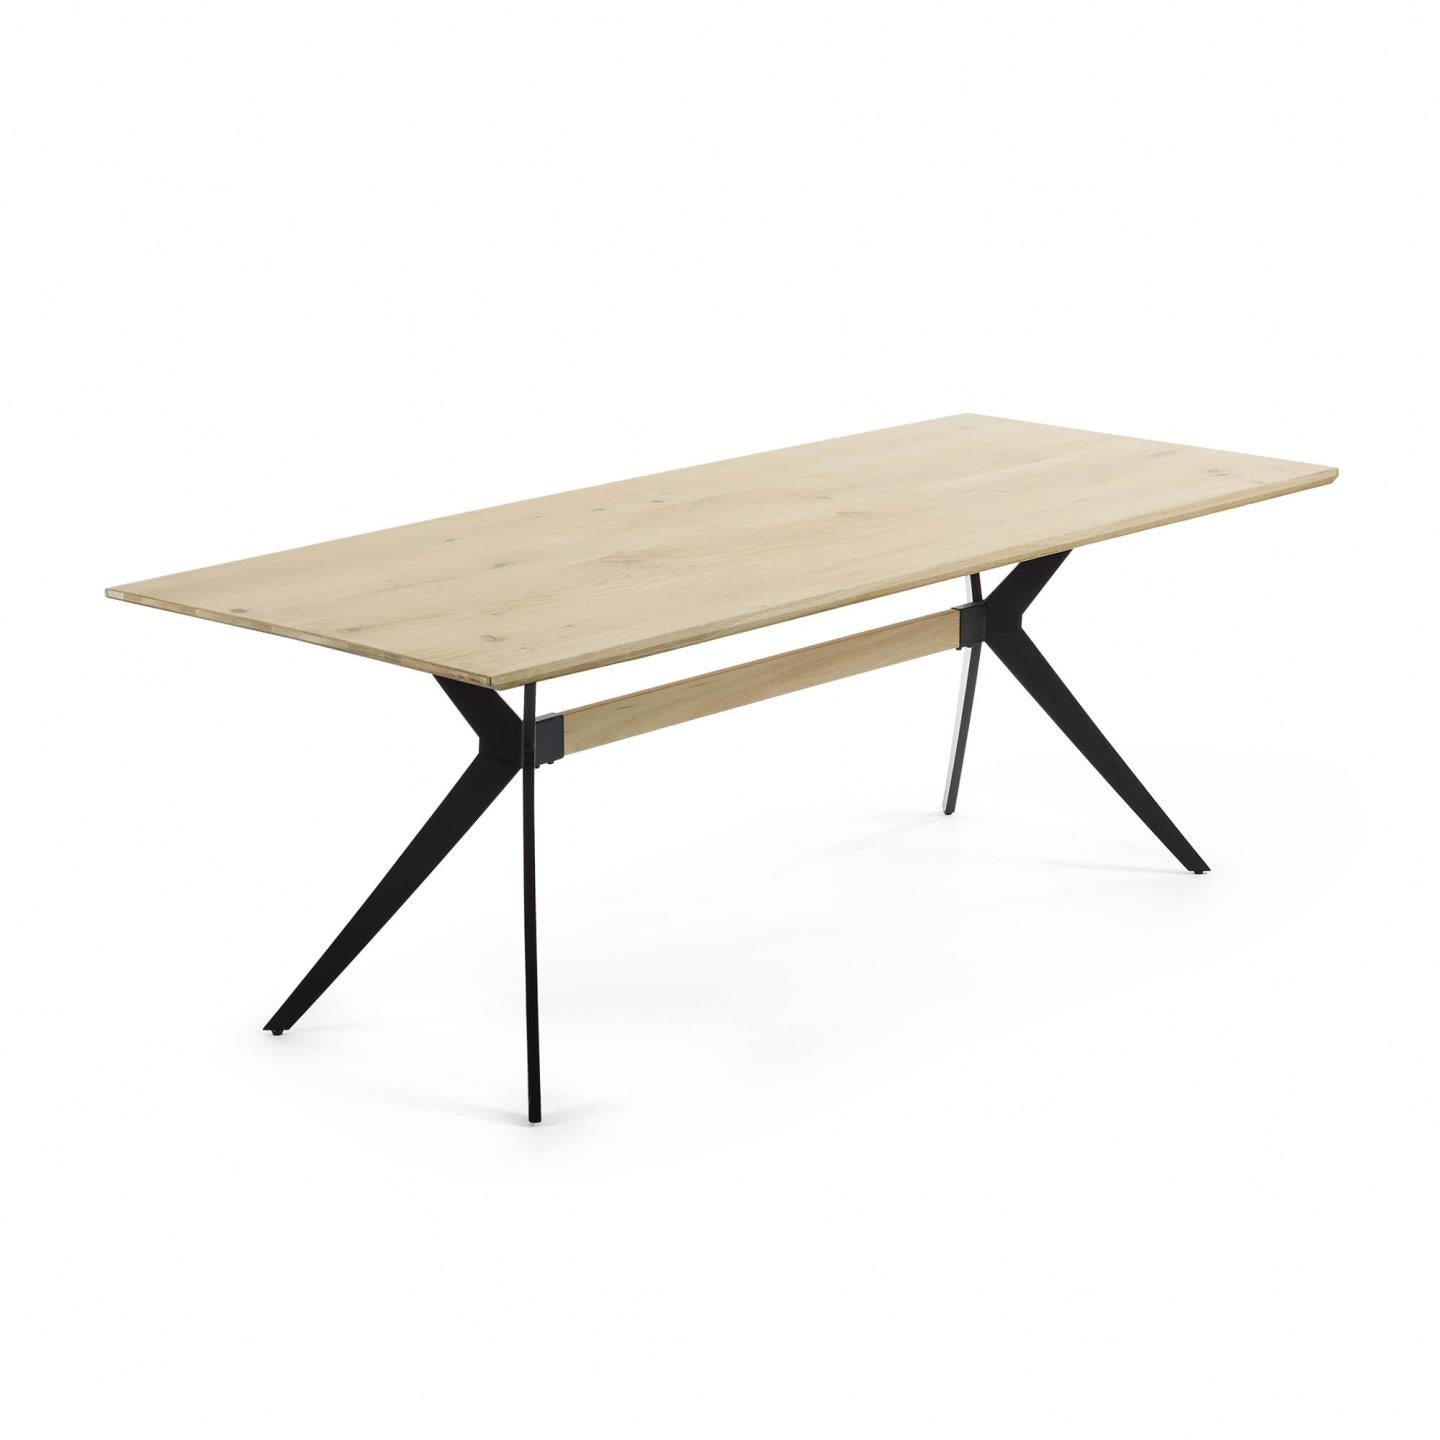 Amethyst oak veneer table with a whitewashed finish and black steel legs, 160 x 90 cm